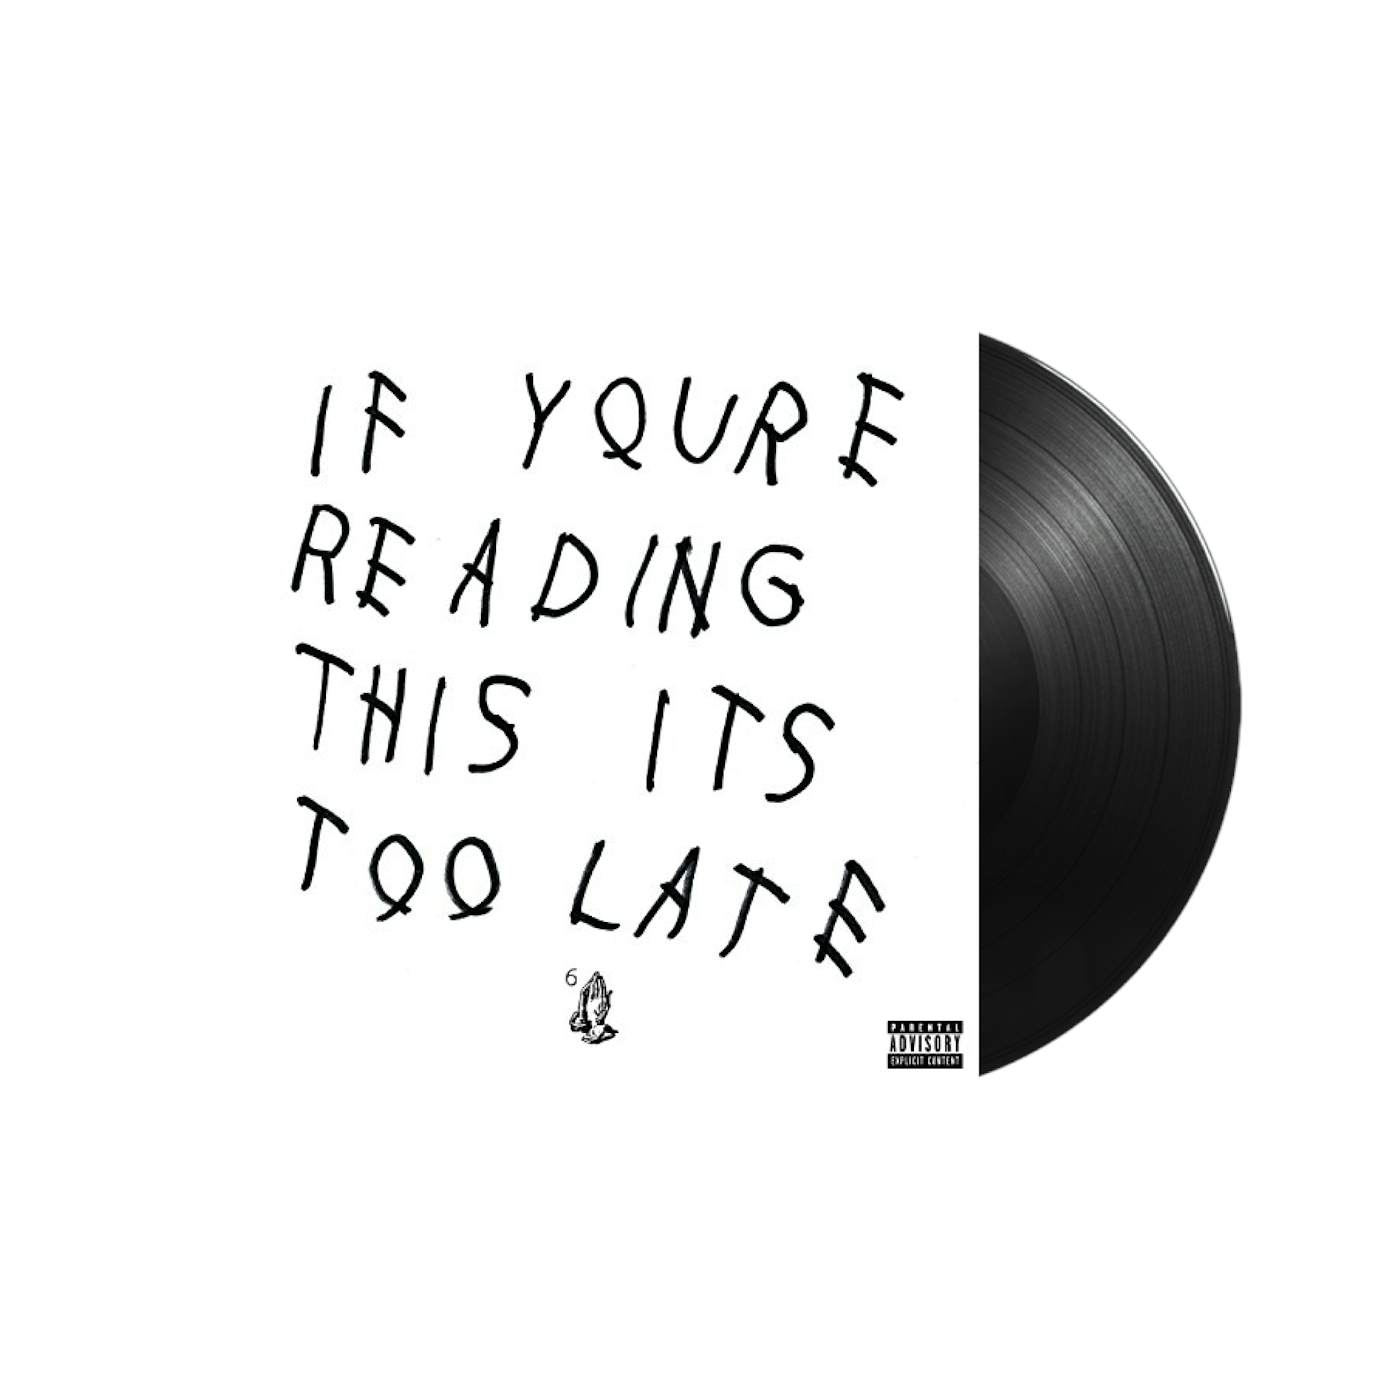 Drake ‎/ This It's Too Late 2xLP